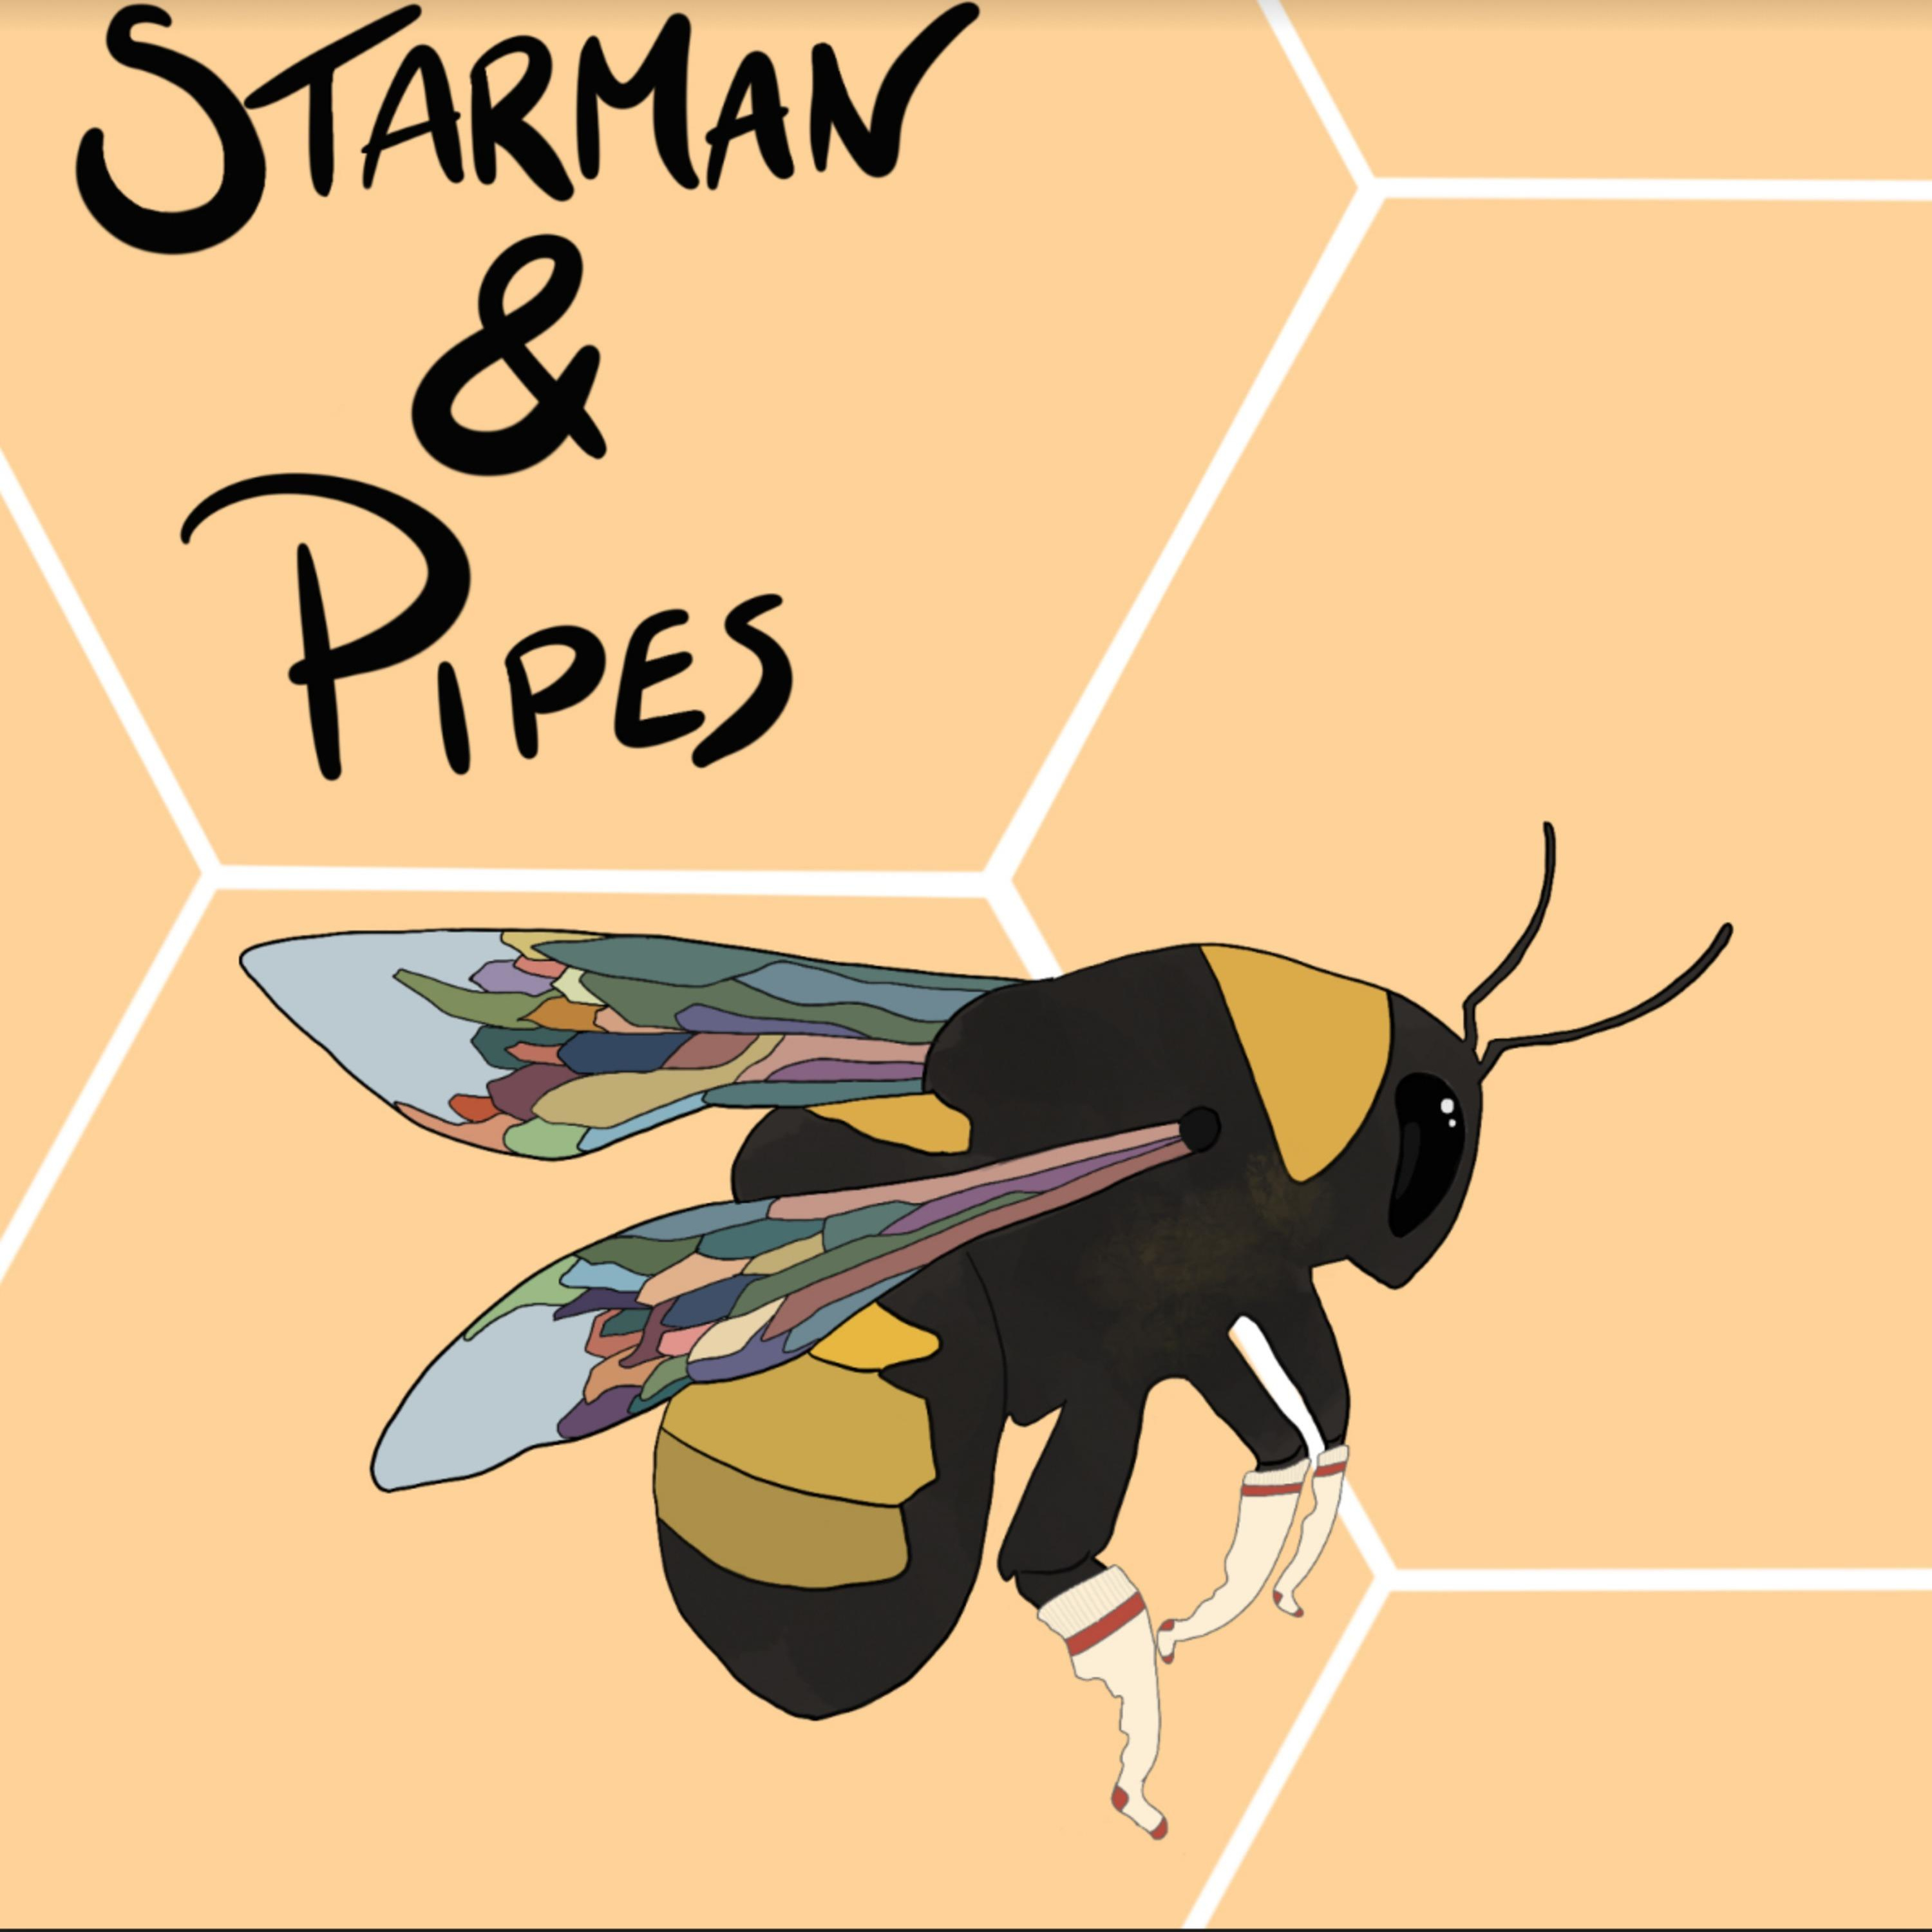 Artwork for Starman & Pipes